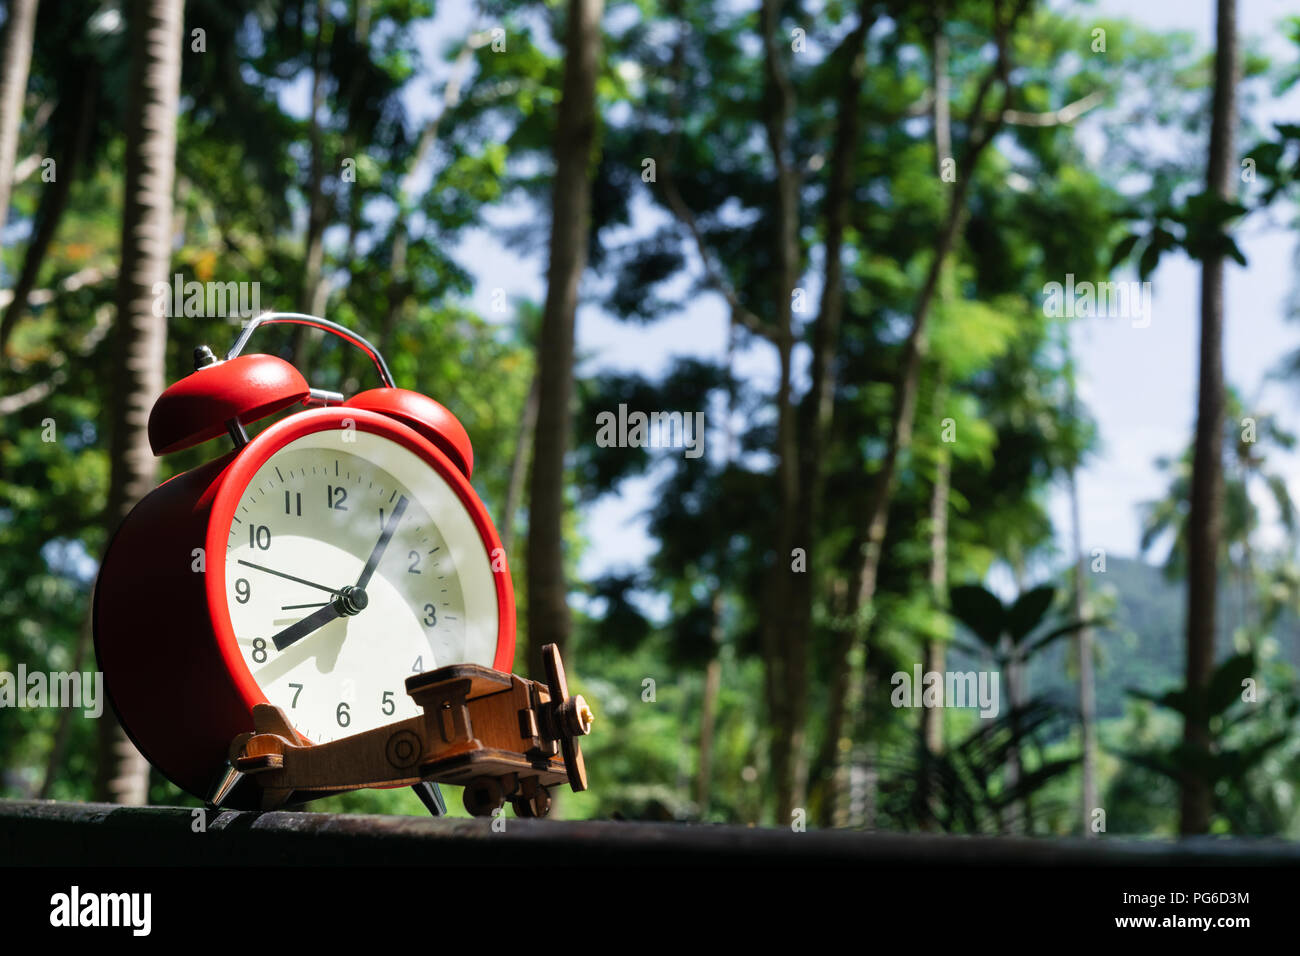 Wooden airplane model and red alarm clock on the wood with beautiful tropical forest background for nature travelling background concept. Stock Photo